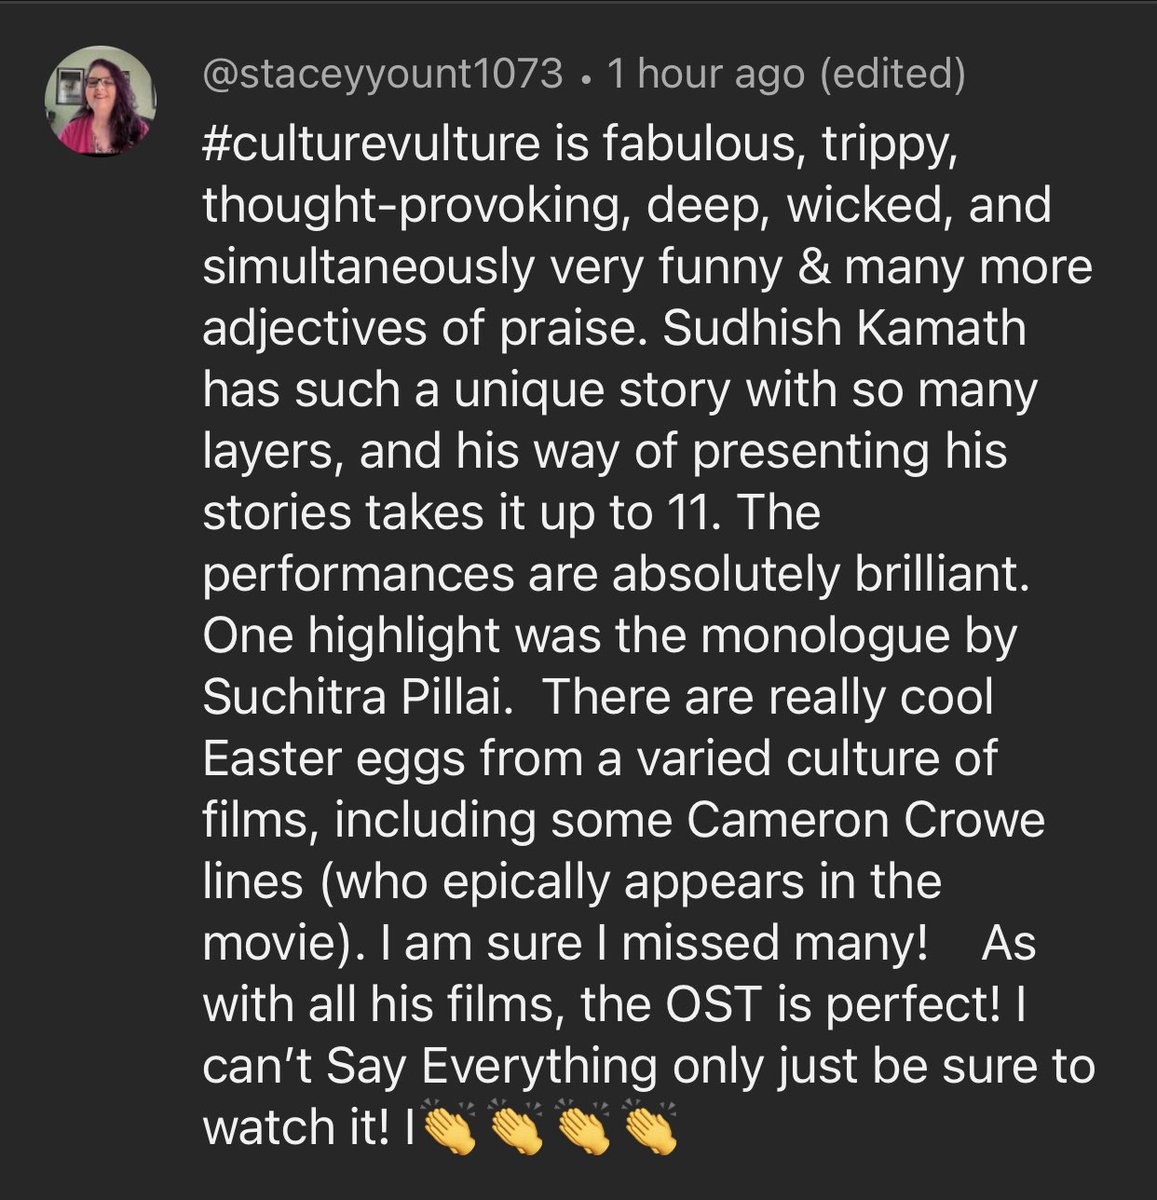 Thank you again @Bollywriter for all the love for #CultureVulture🚀 in this comment. ❤️🤗